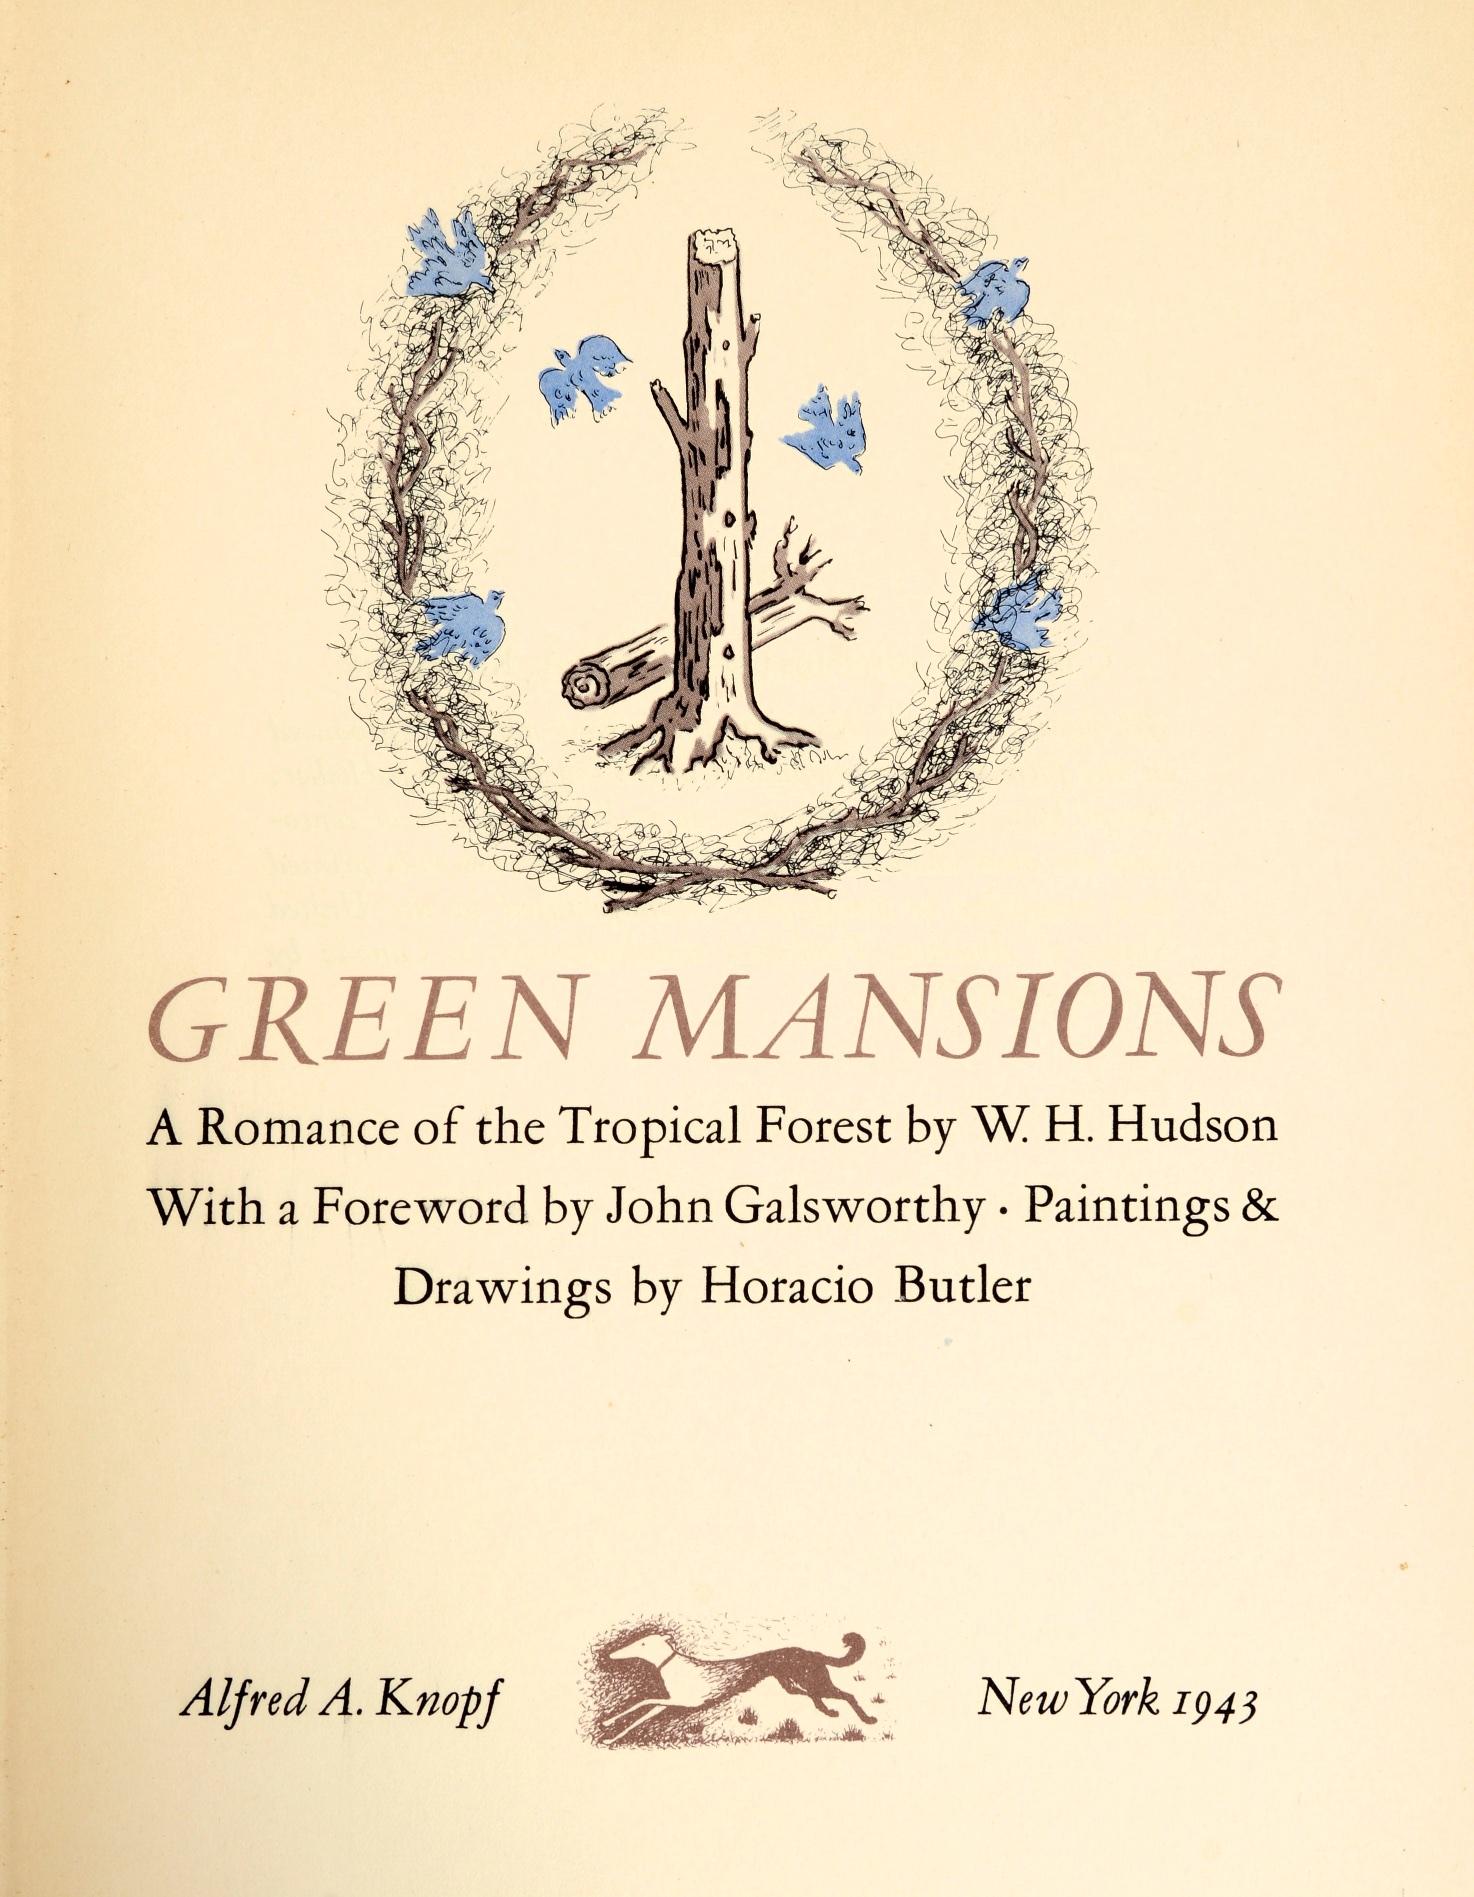 Green Mansions: A Romance of the Tropical Forest by William Henry Hudson. New York: Knopf, 1943. First Edition thus hardcover. With a foreword by John Galsworthy. Illustrated with paintings and drawings by Horacio Butler 231pp. Centenary edition